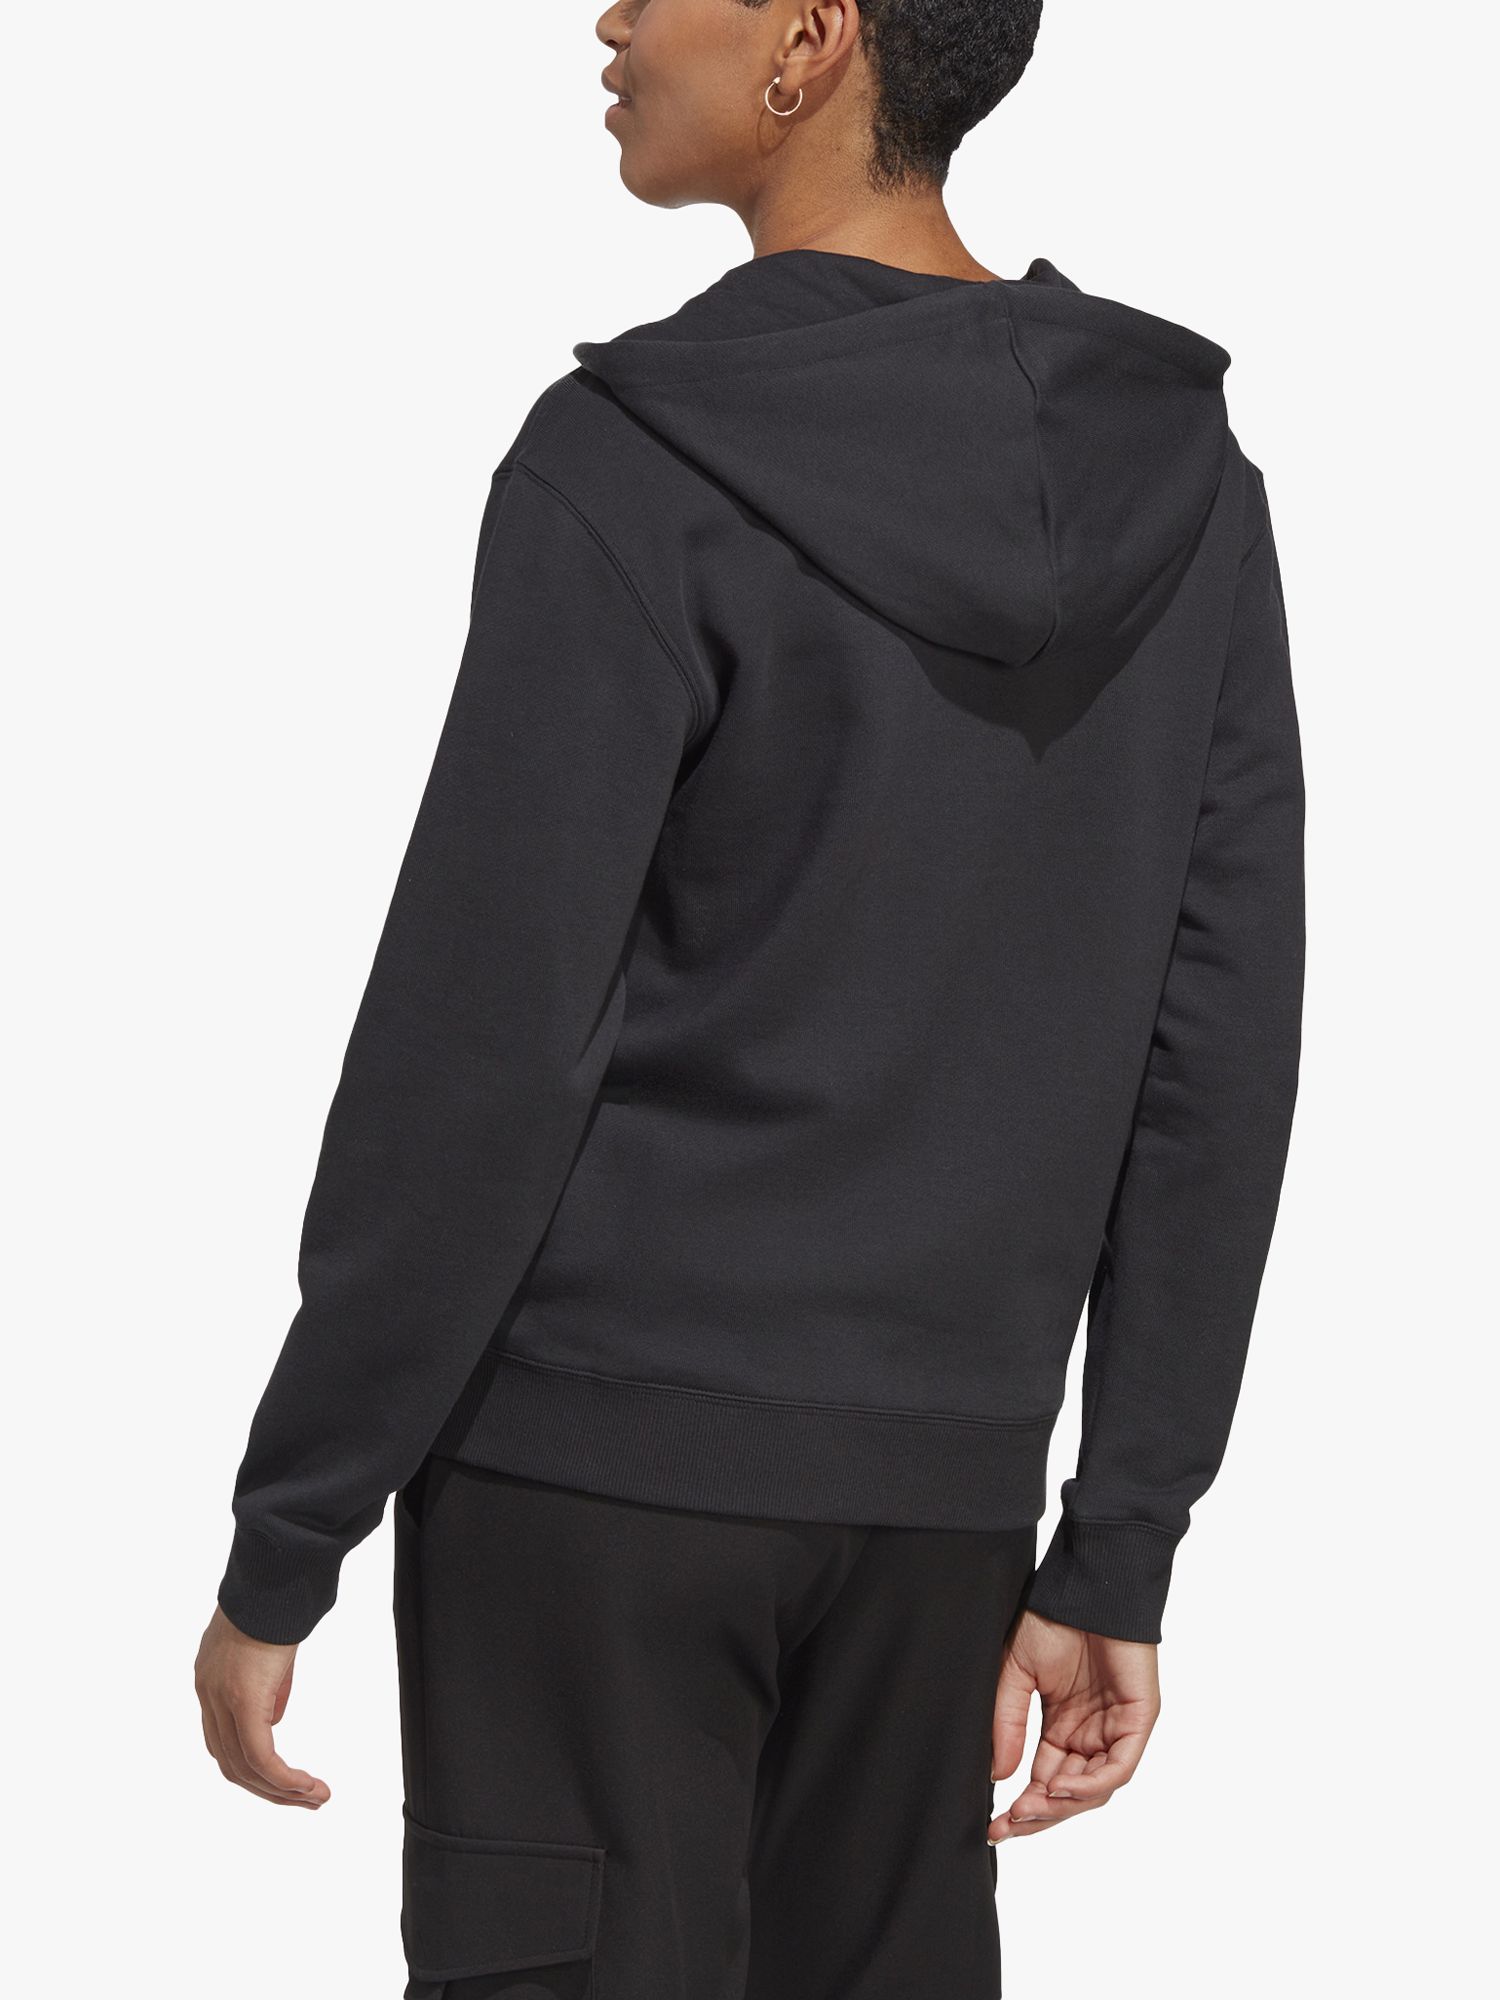 adidas Essentials Linear Full-Zip French Terry Hoodie at John Lewis ...